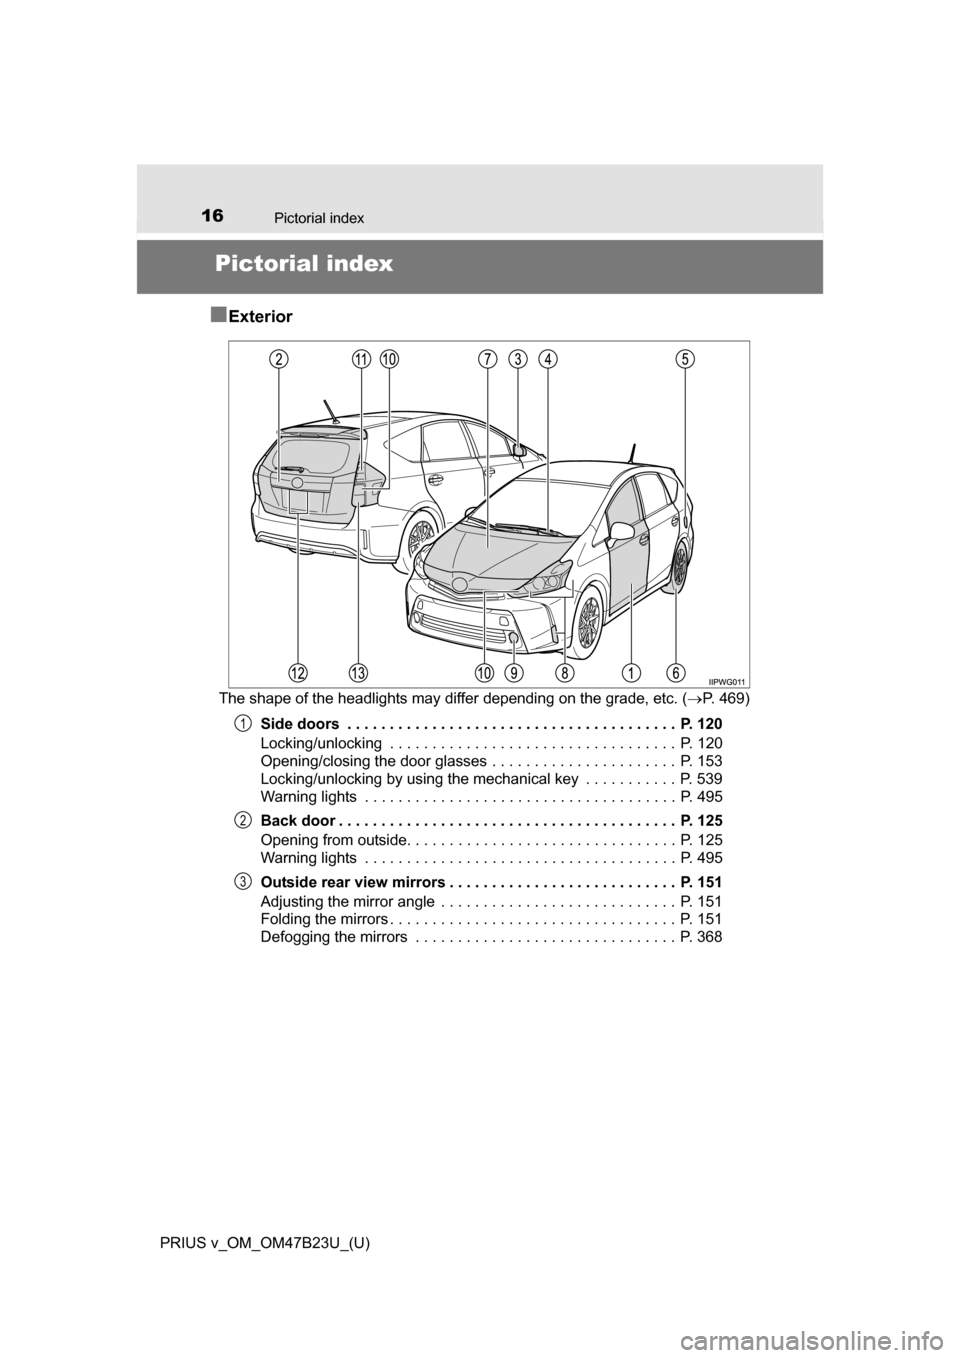 TOYOTA PRIUS V 2017 ZVW40 / 1.G Owners Manual 16Pictorial index
PRIUS v_OM_OM47B23U_(U)
Pictorial index
■
Exterior
The shape of the headlights may differ depending on the grade, etc. ( P. 469)
Side doors  . . . . . . . . . . . . . . . . . . 